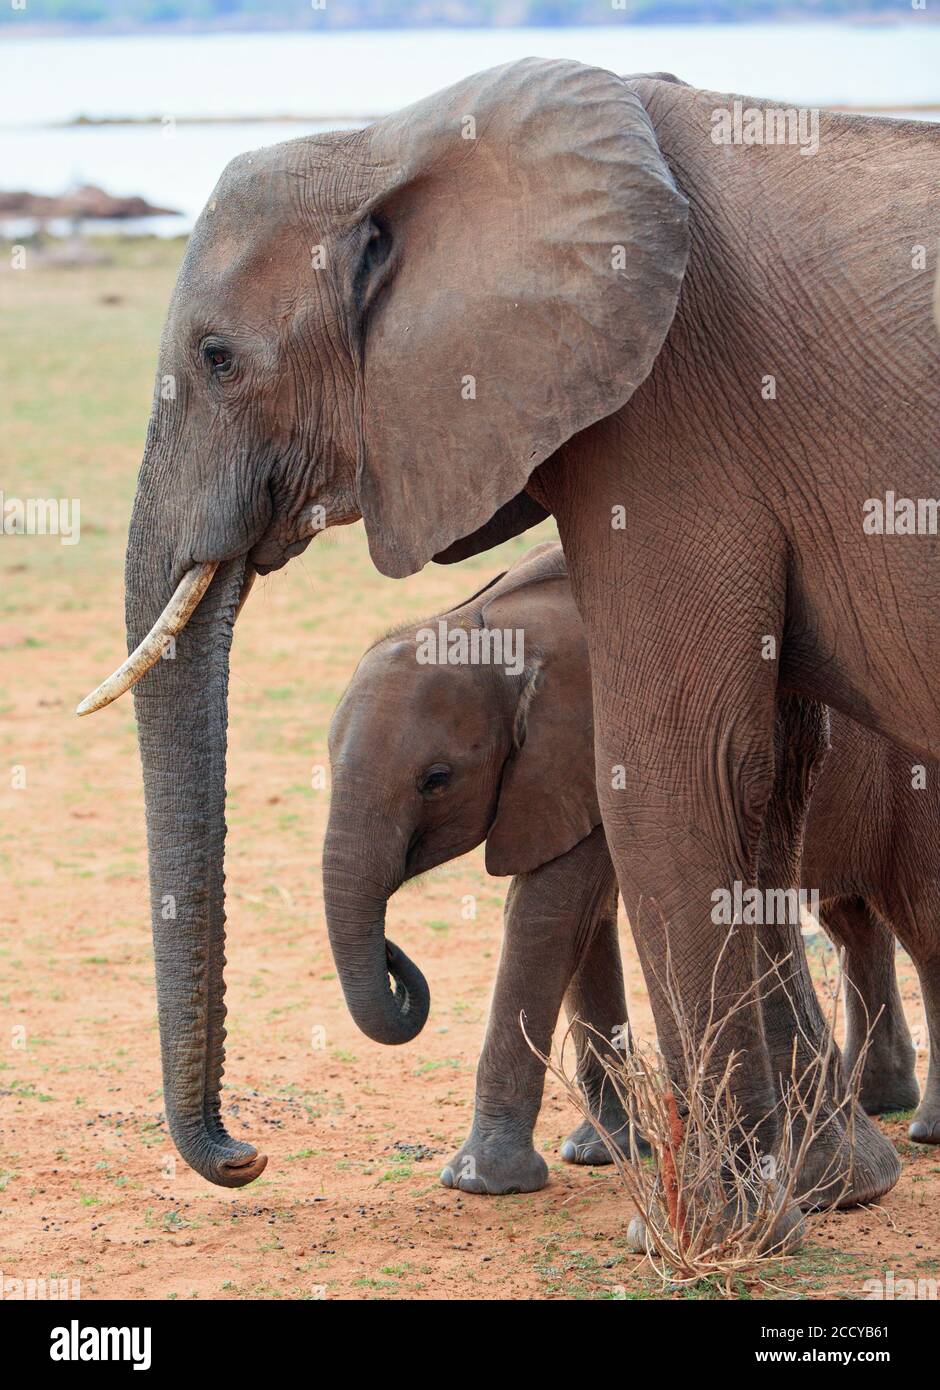 Cute Elephant calf framed by its Mothers trunk Stock Photo